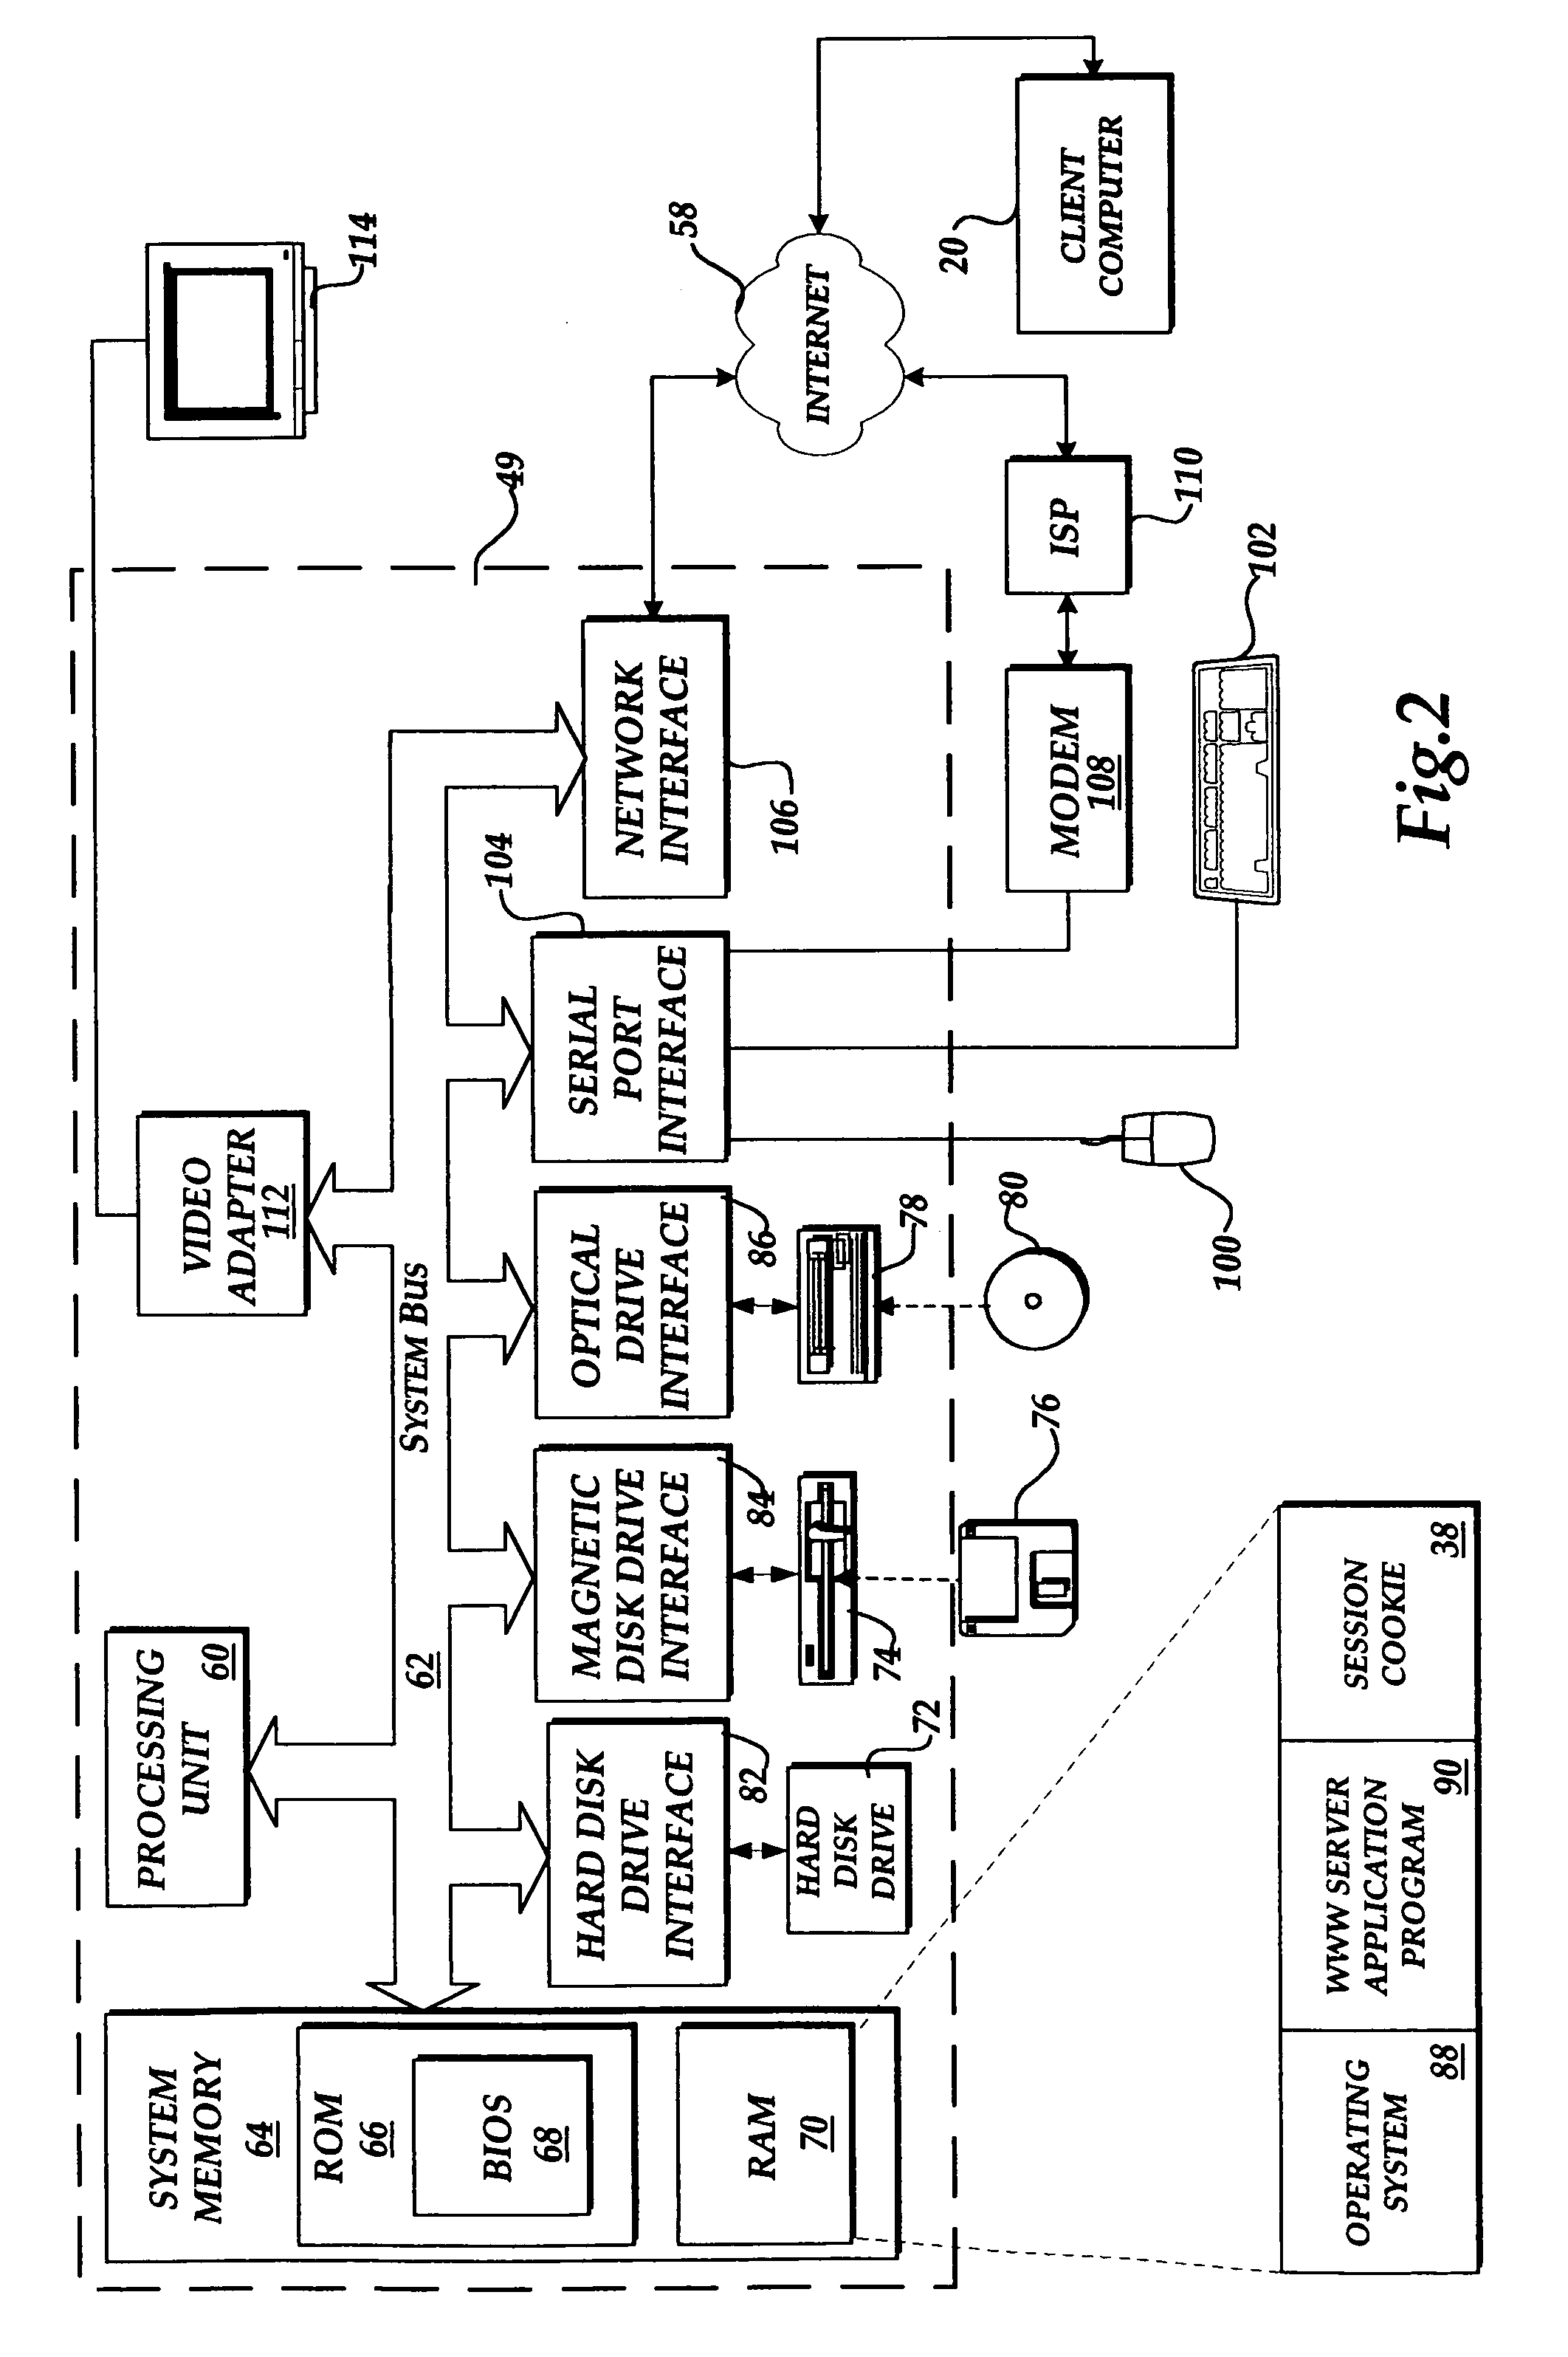 Method and apparatus for encoding and storing session data